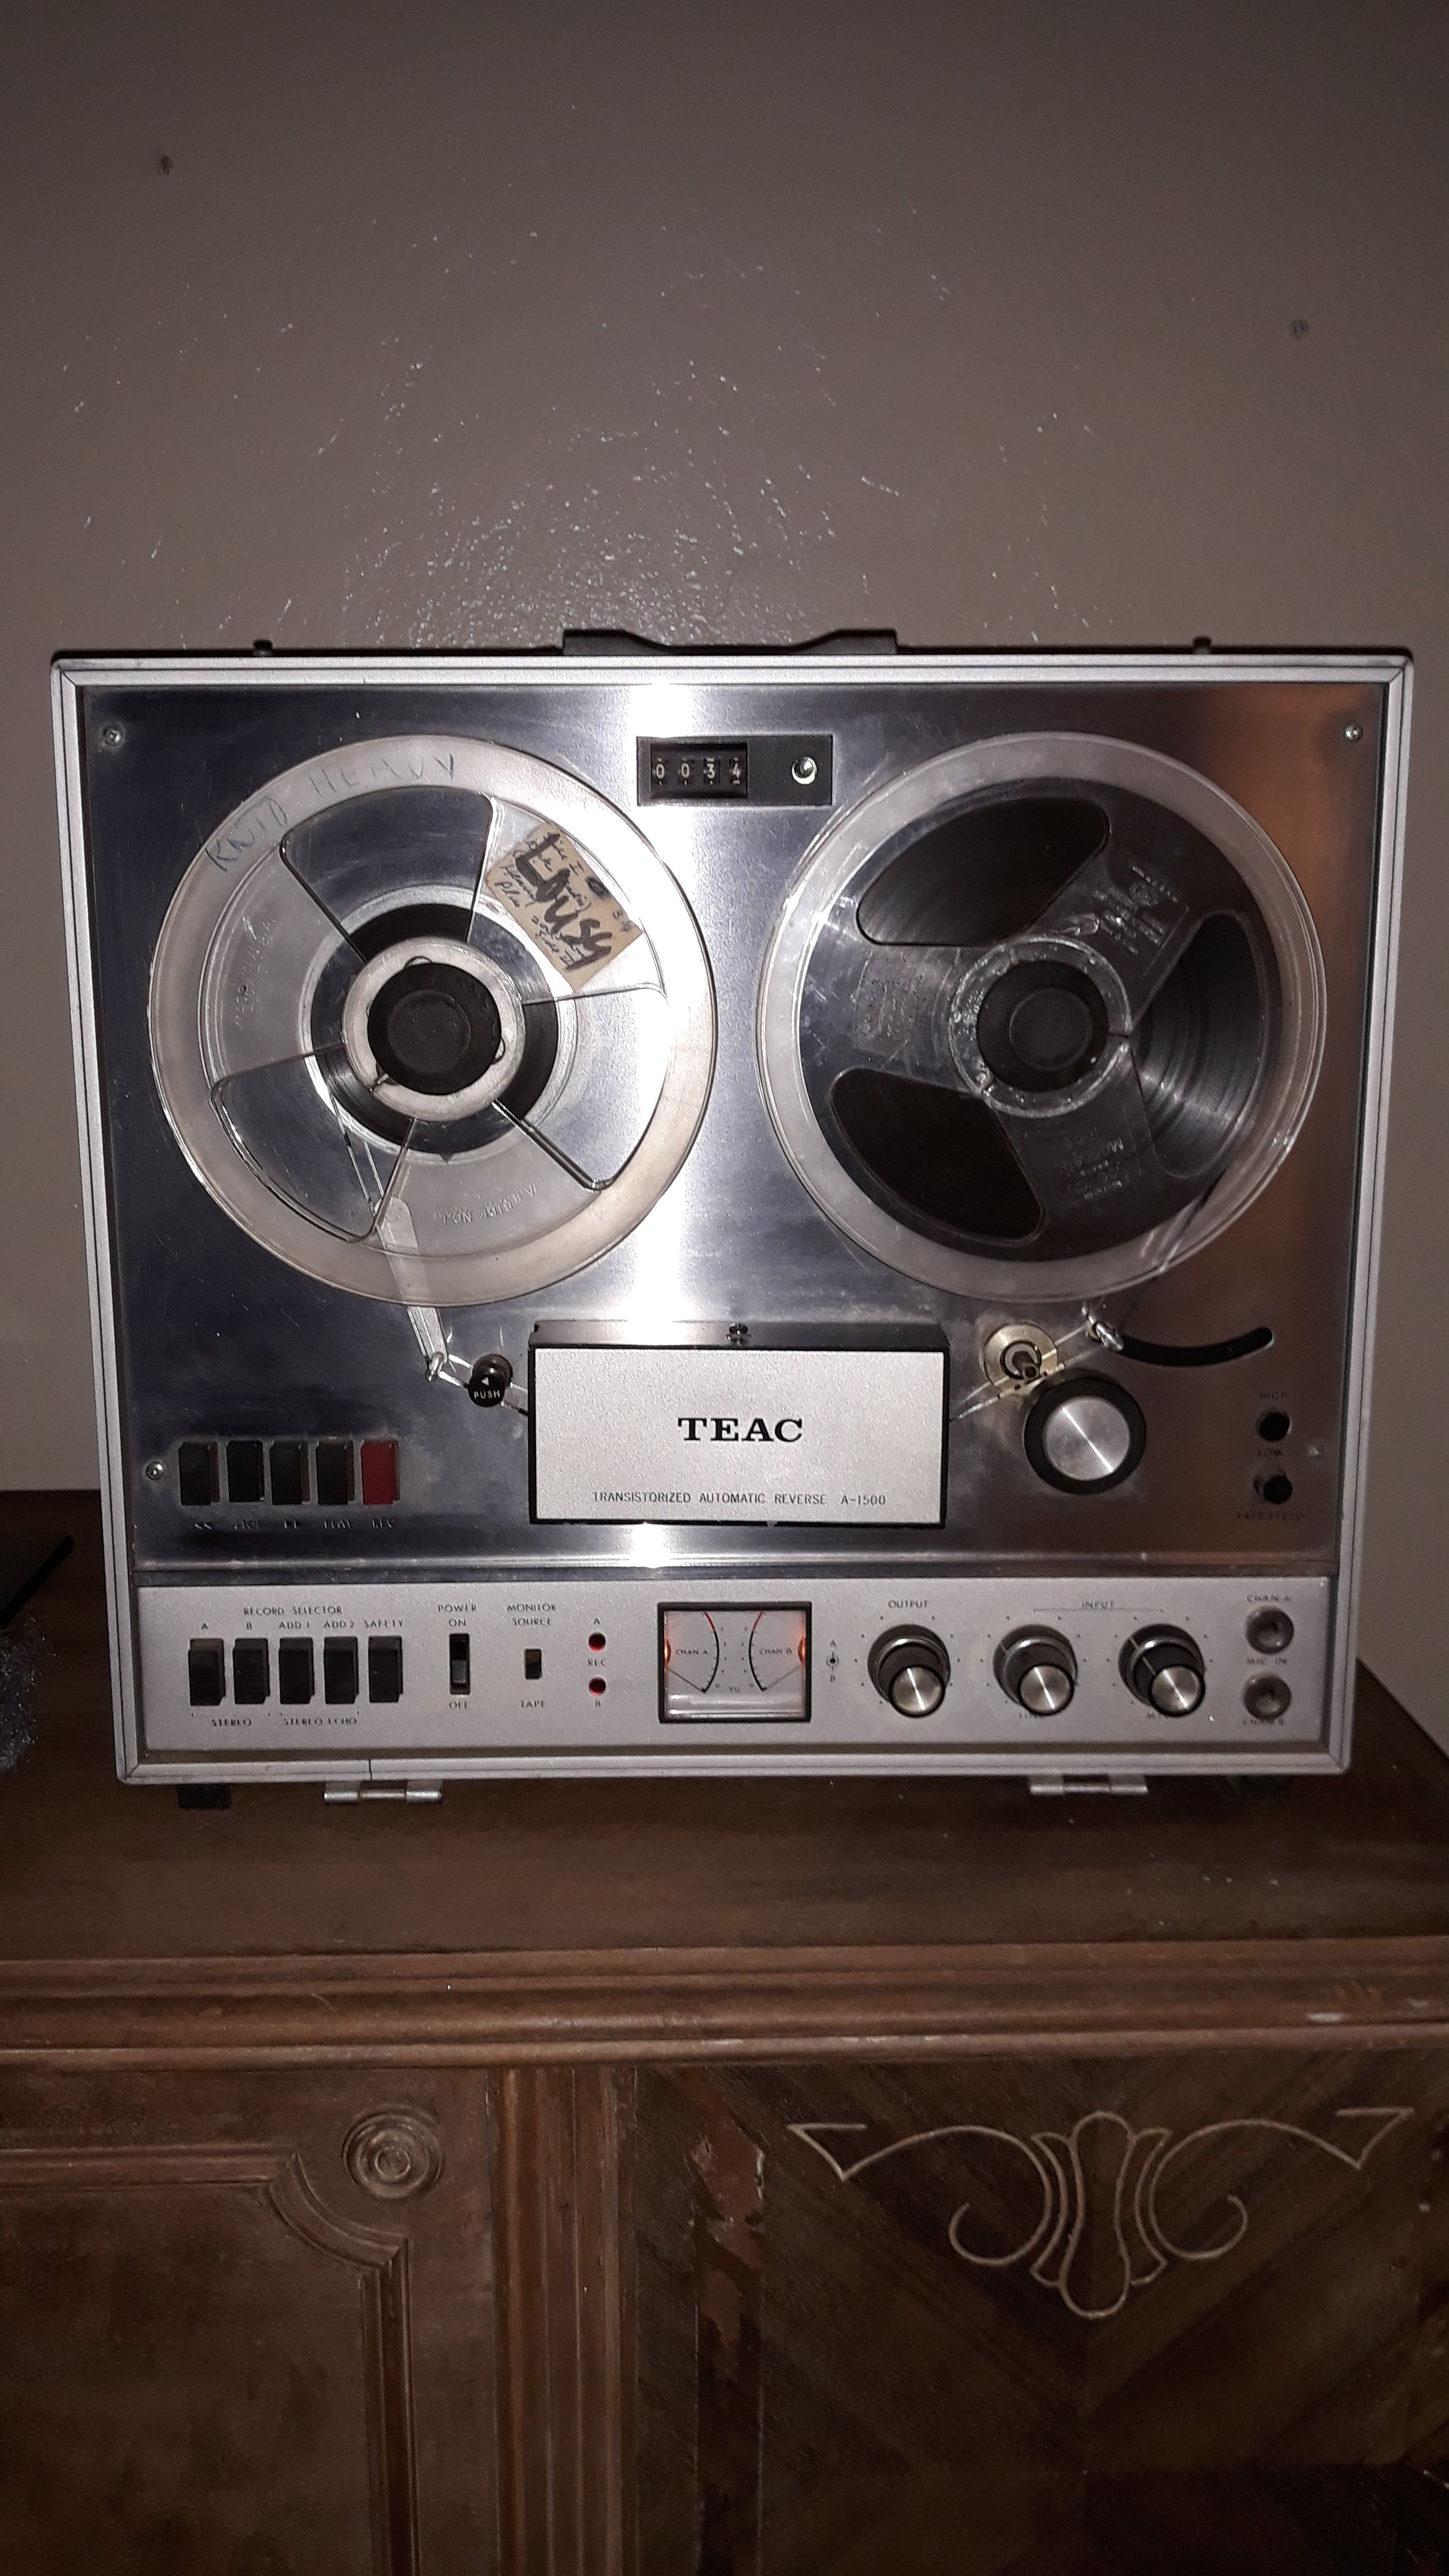 TEAC reel to reel machine with case WORKS perfectly